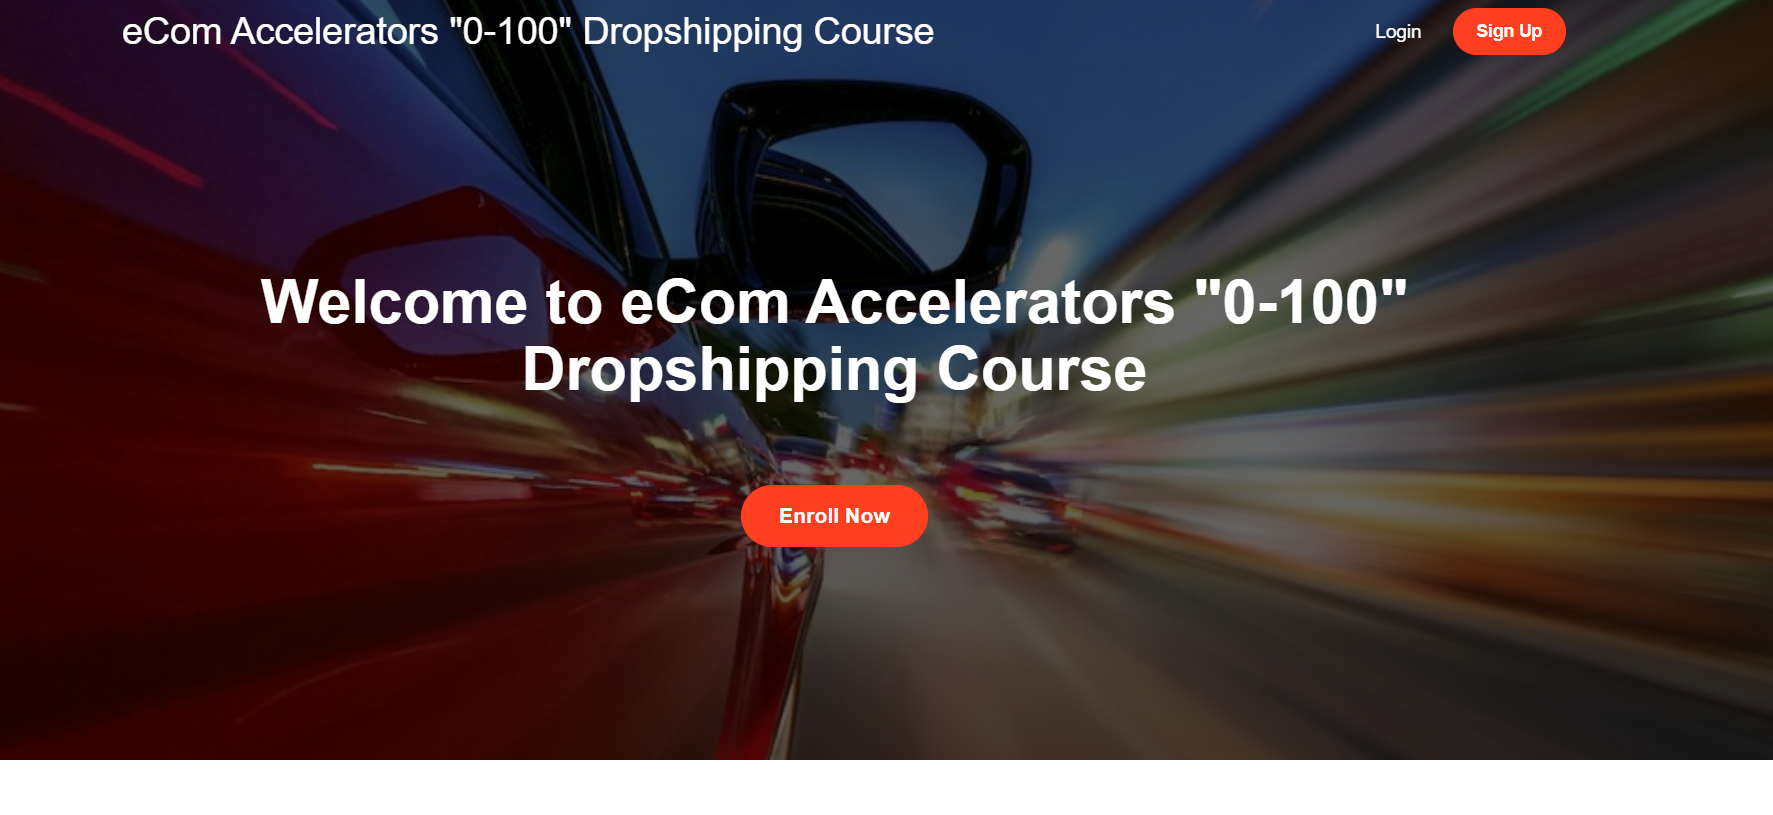 The eCom Accelerator 0-100 Program is created by Jordan Welch. It is a comprehensive 8-week online course designed to guide you through building a successful Shopify dropshipping store.